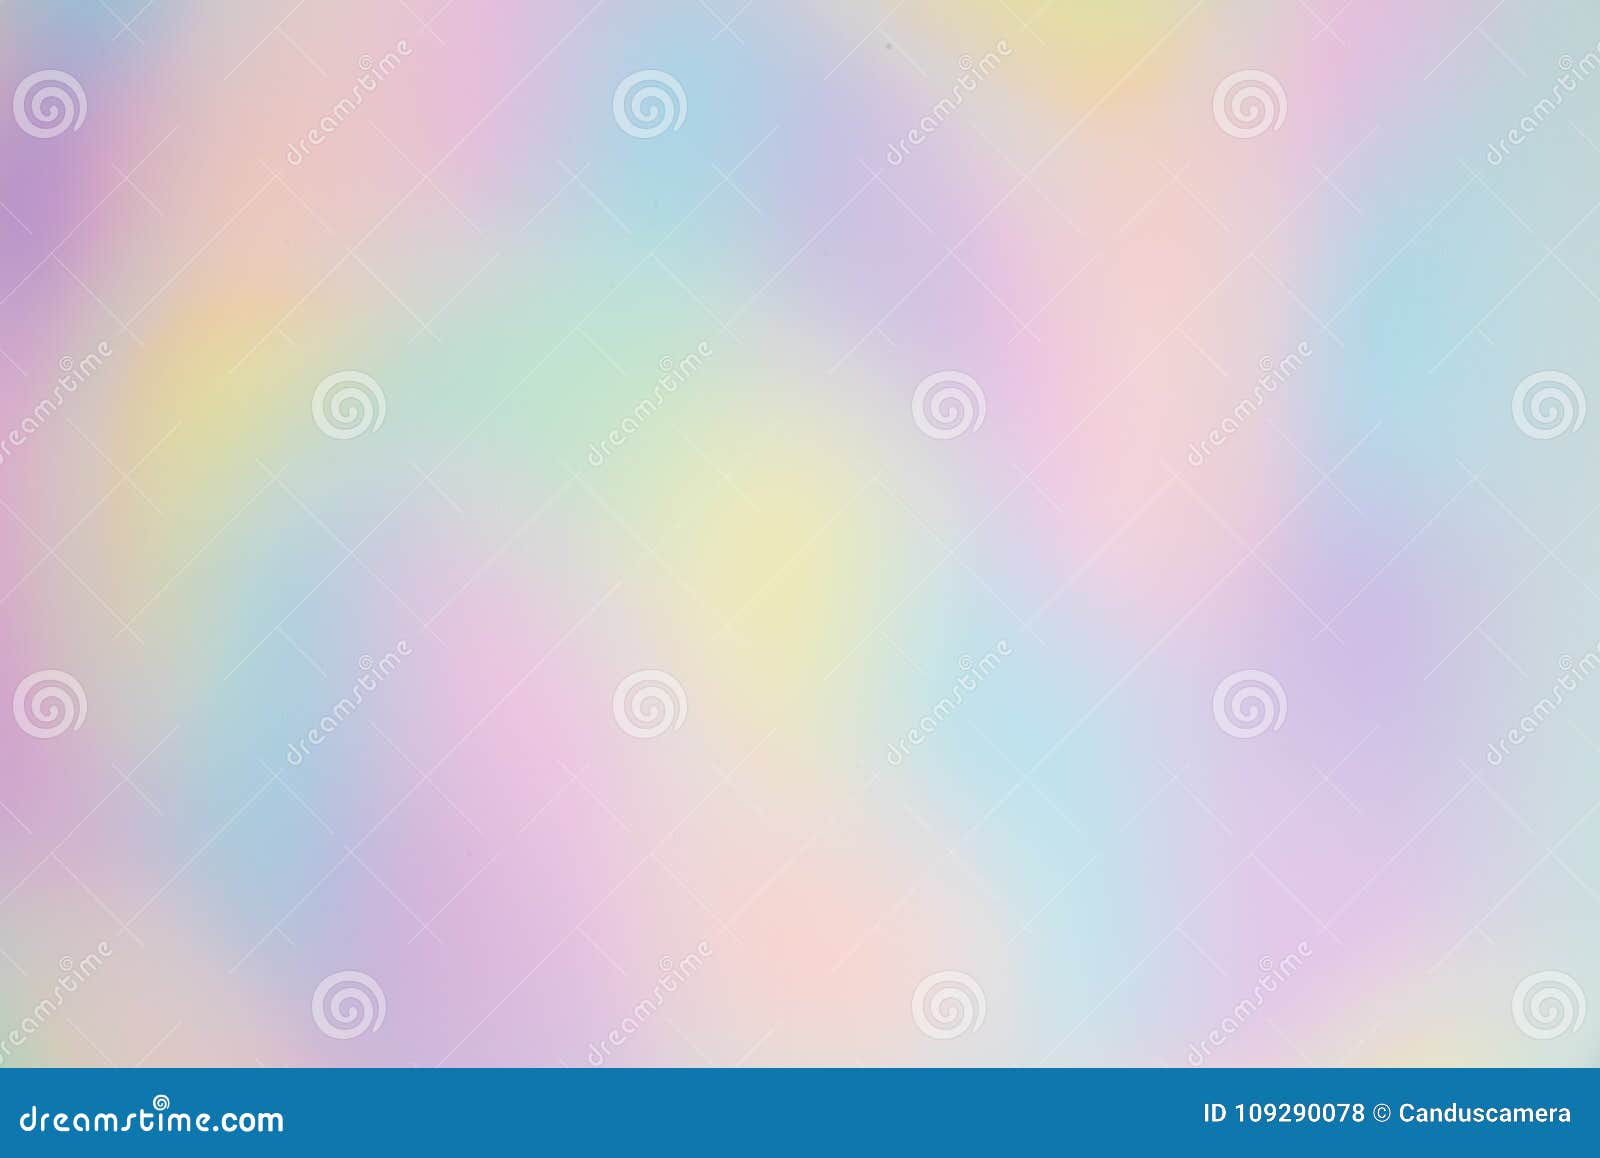 blurred and pretty rainbow or multi colored background with organic, free-formed s.